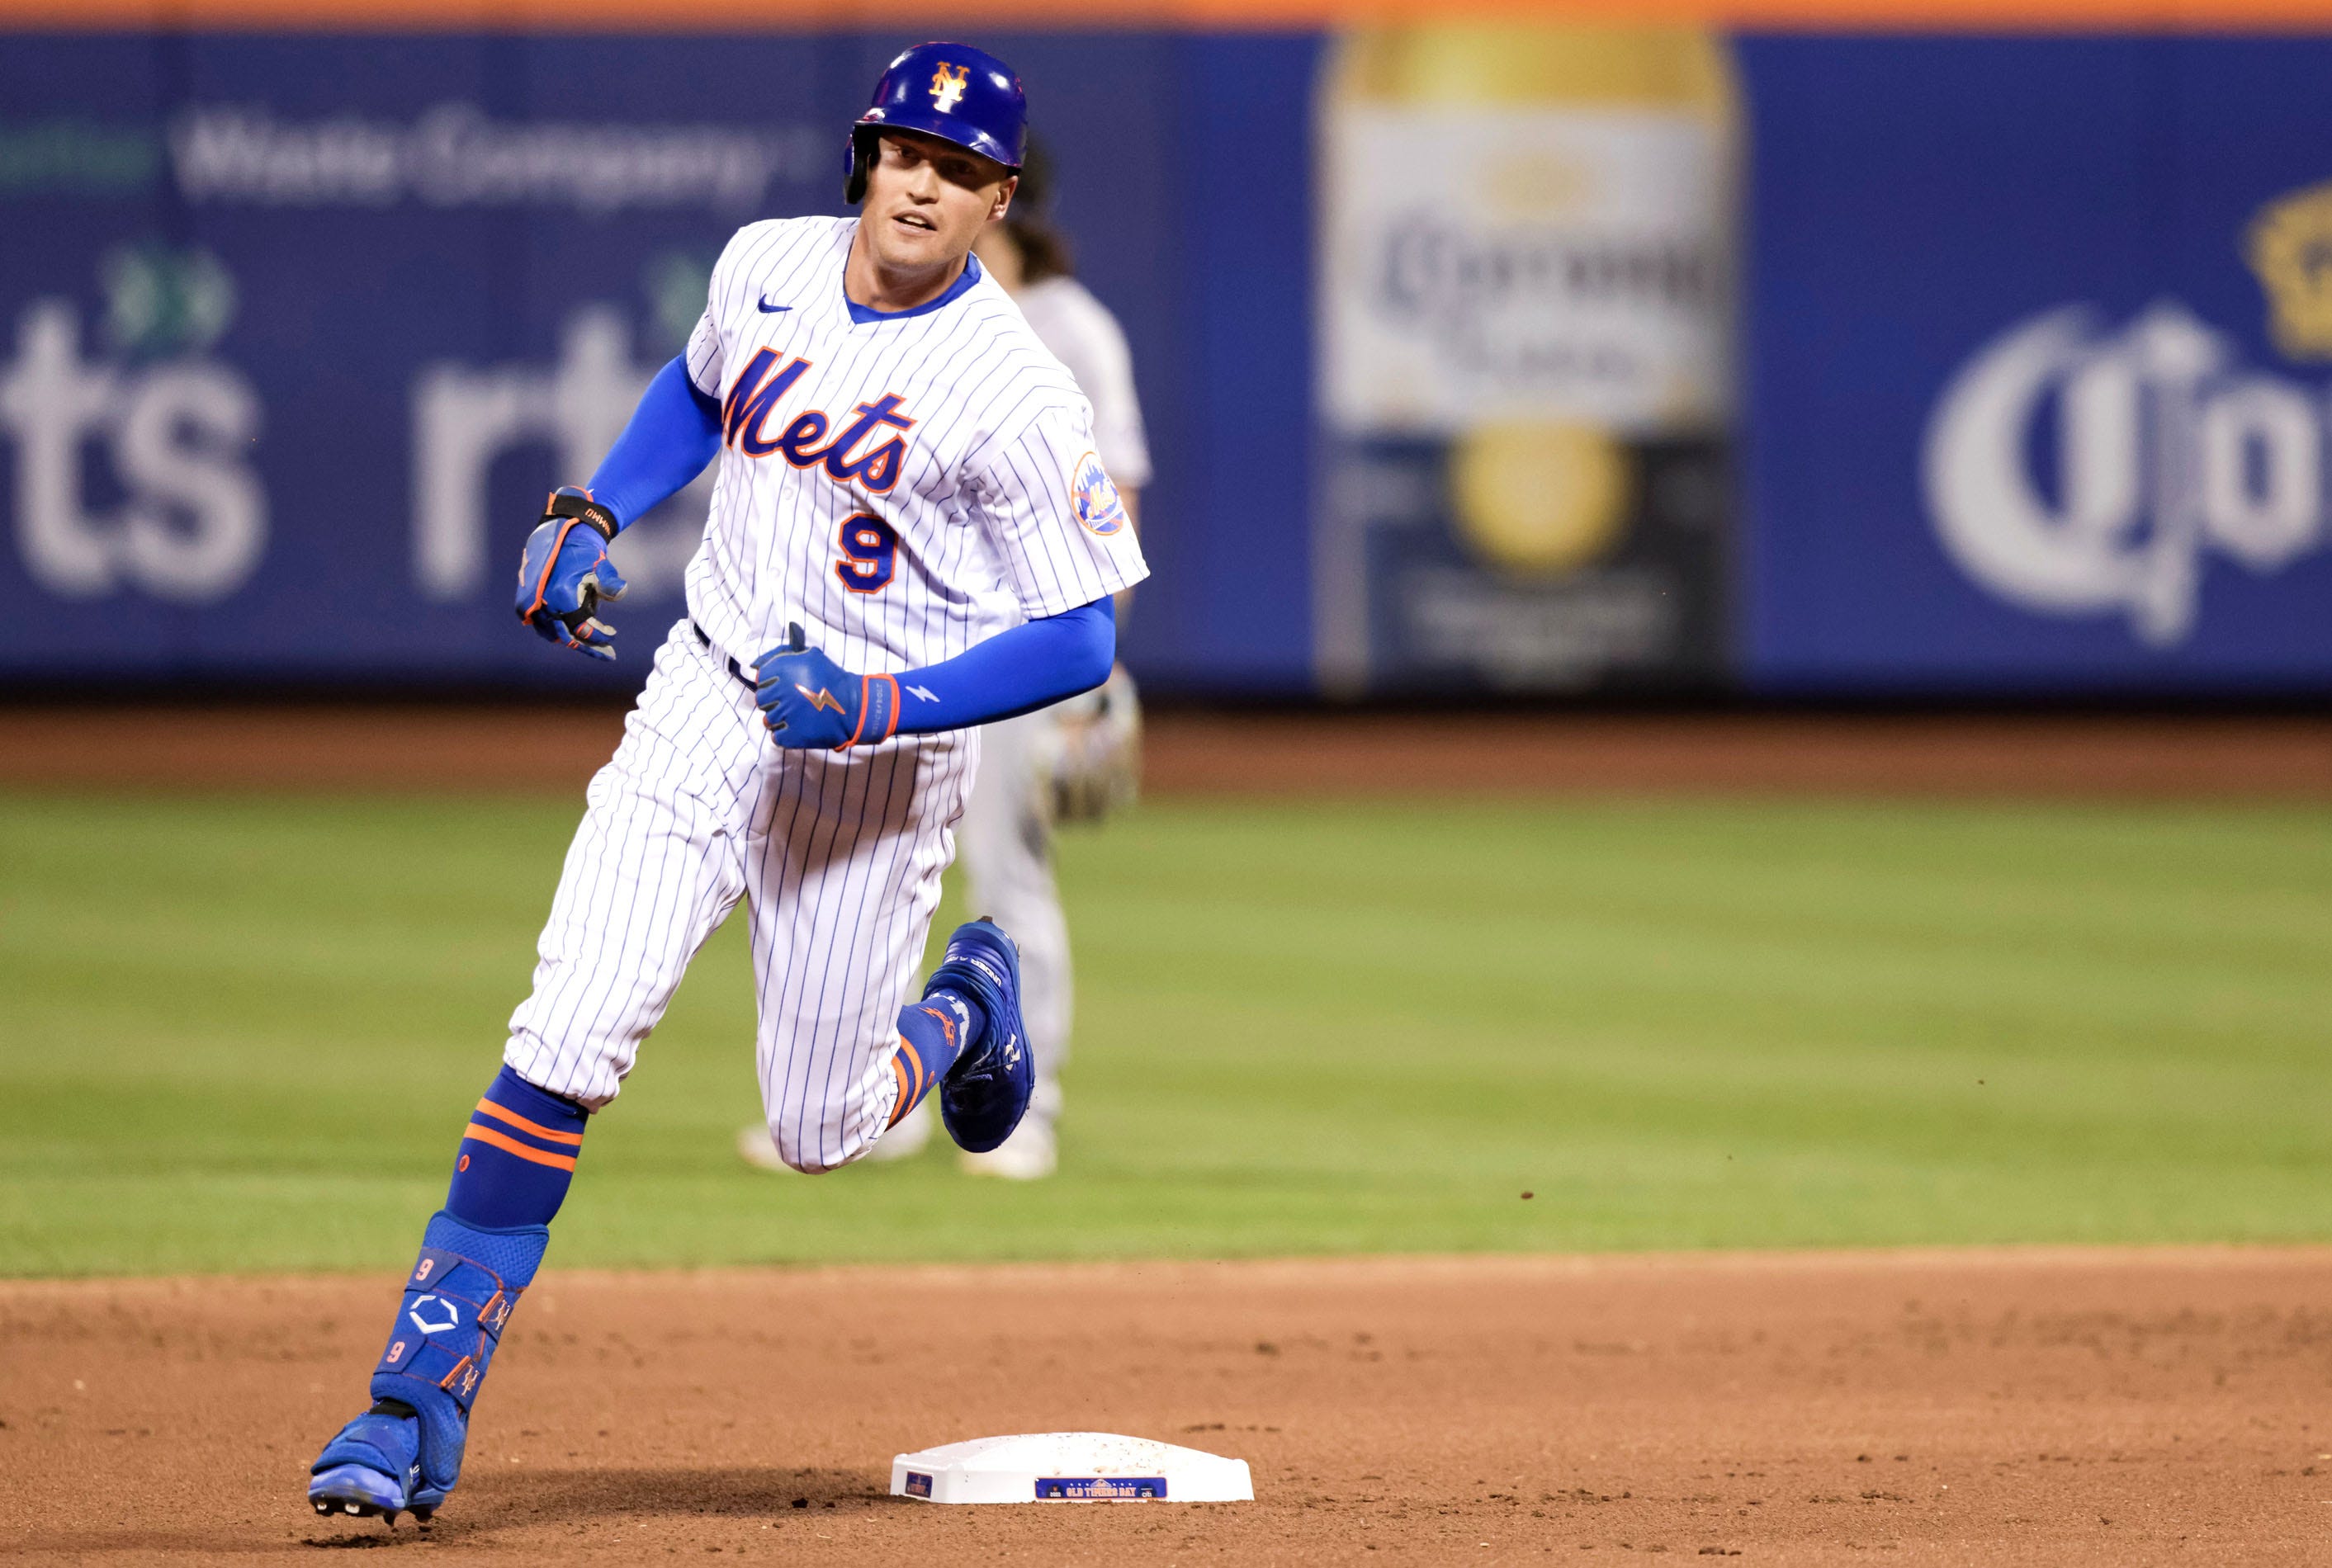 Jose Reyes and Seth Lugo Lead Mets to Third Straight Victory - The